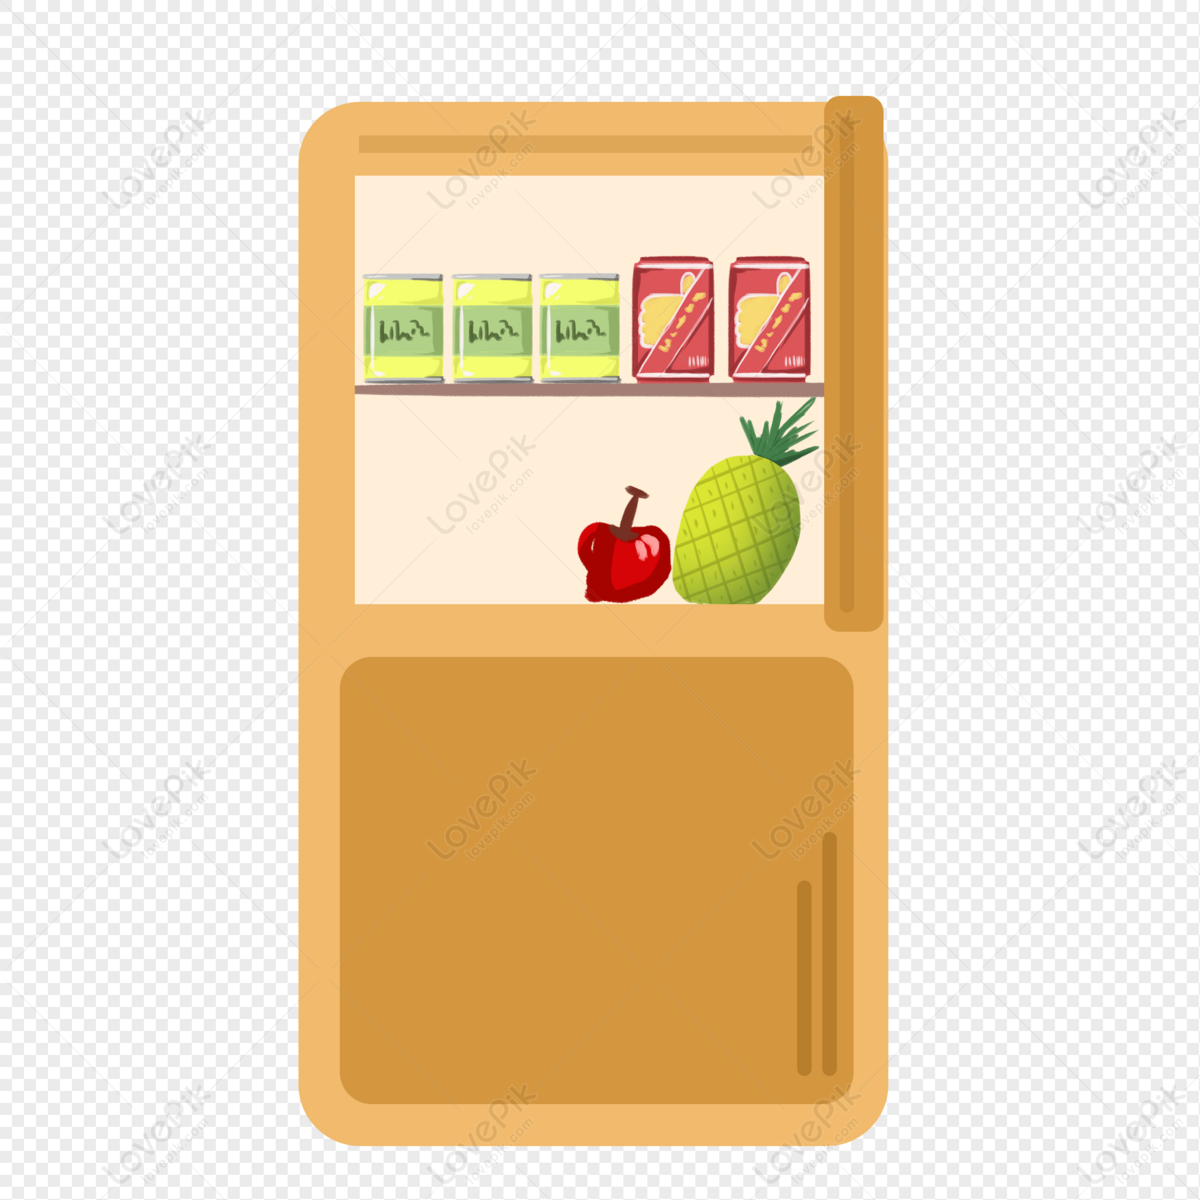 Cartoon Refrigerator PNG Image And Clipart Image For Free Download -  Lovepik | 401469688